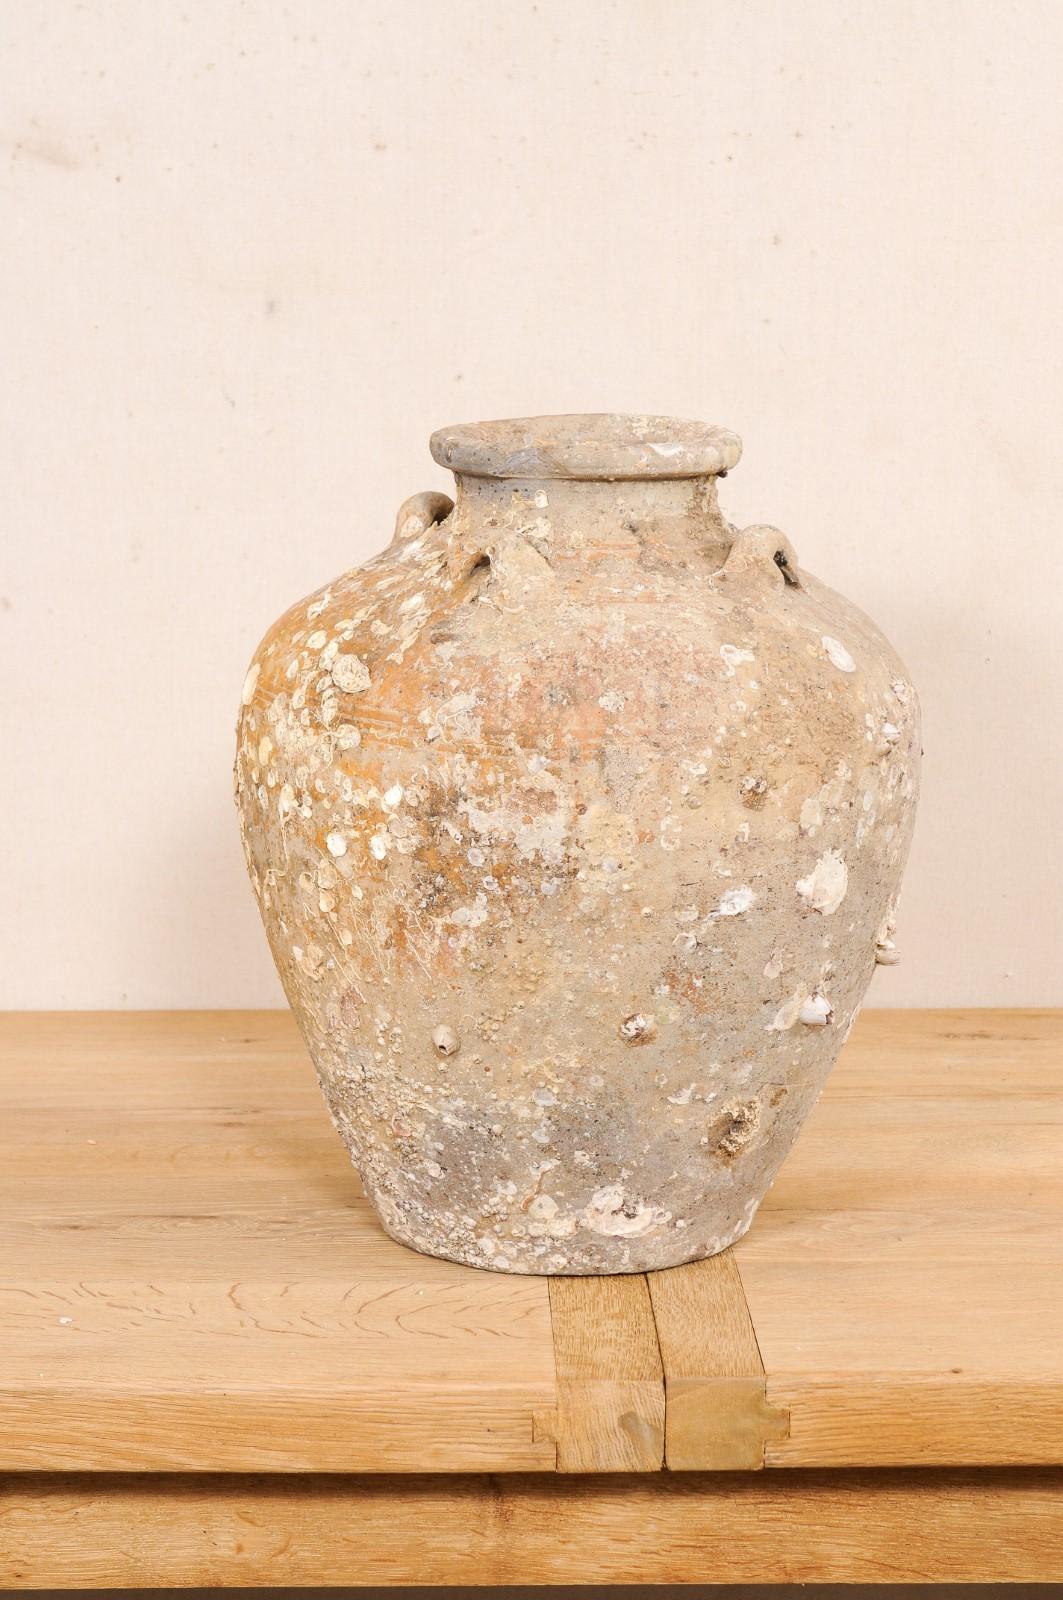 This centuries-old ceramic vessel from Thailand is an excellent specimen of a salvaged ceramic jar from a shipwreck during in the Ming gap period. This antique jar from Thailand, circa early to mid 16th century, stands just over 20 inches in height